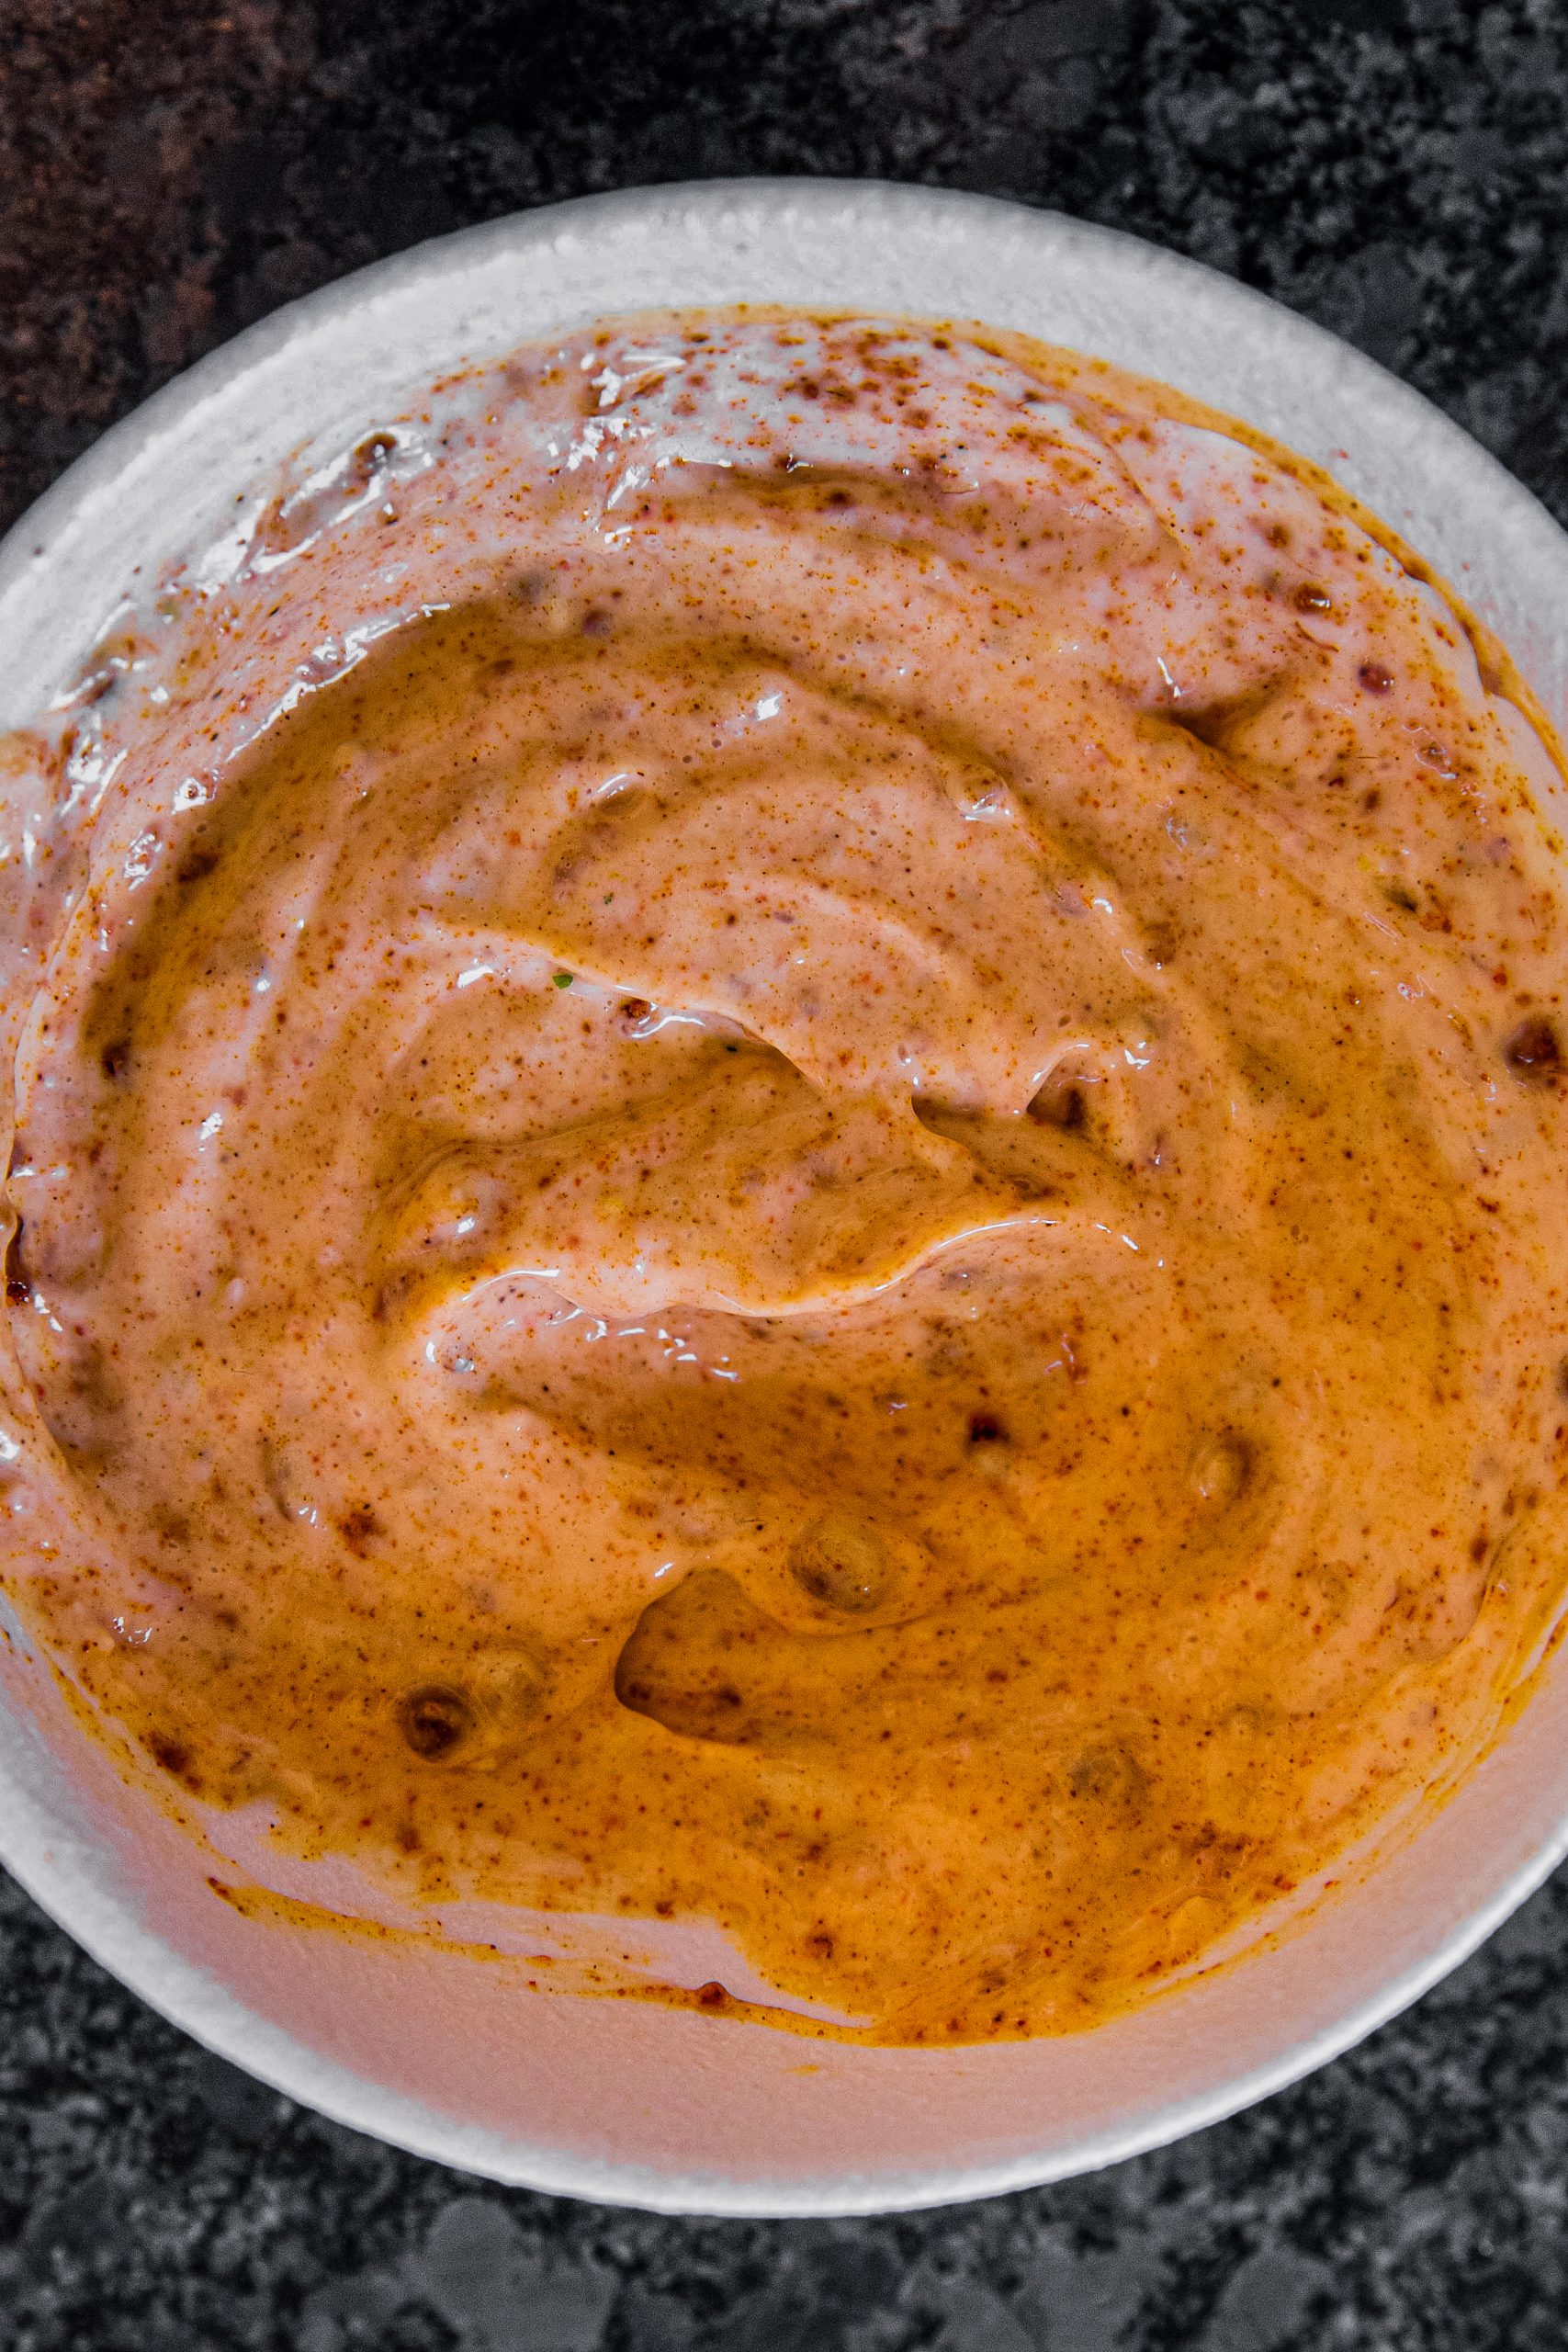 Stir together all the ingredients for the dressing in a bowl. Take to the fridge until it’s ready to use.